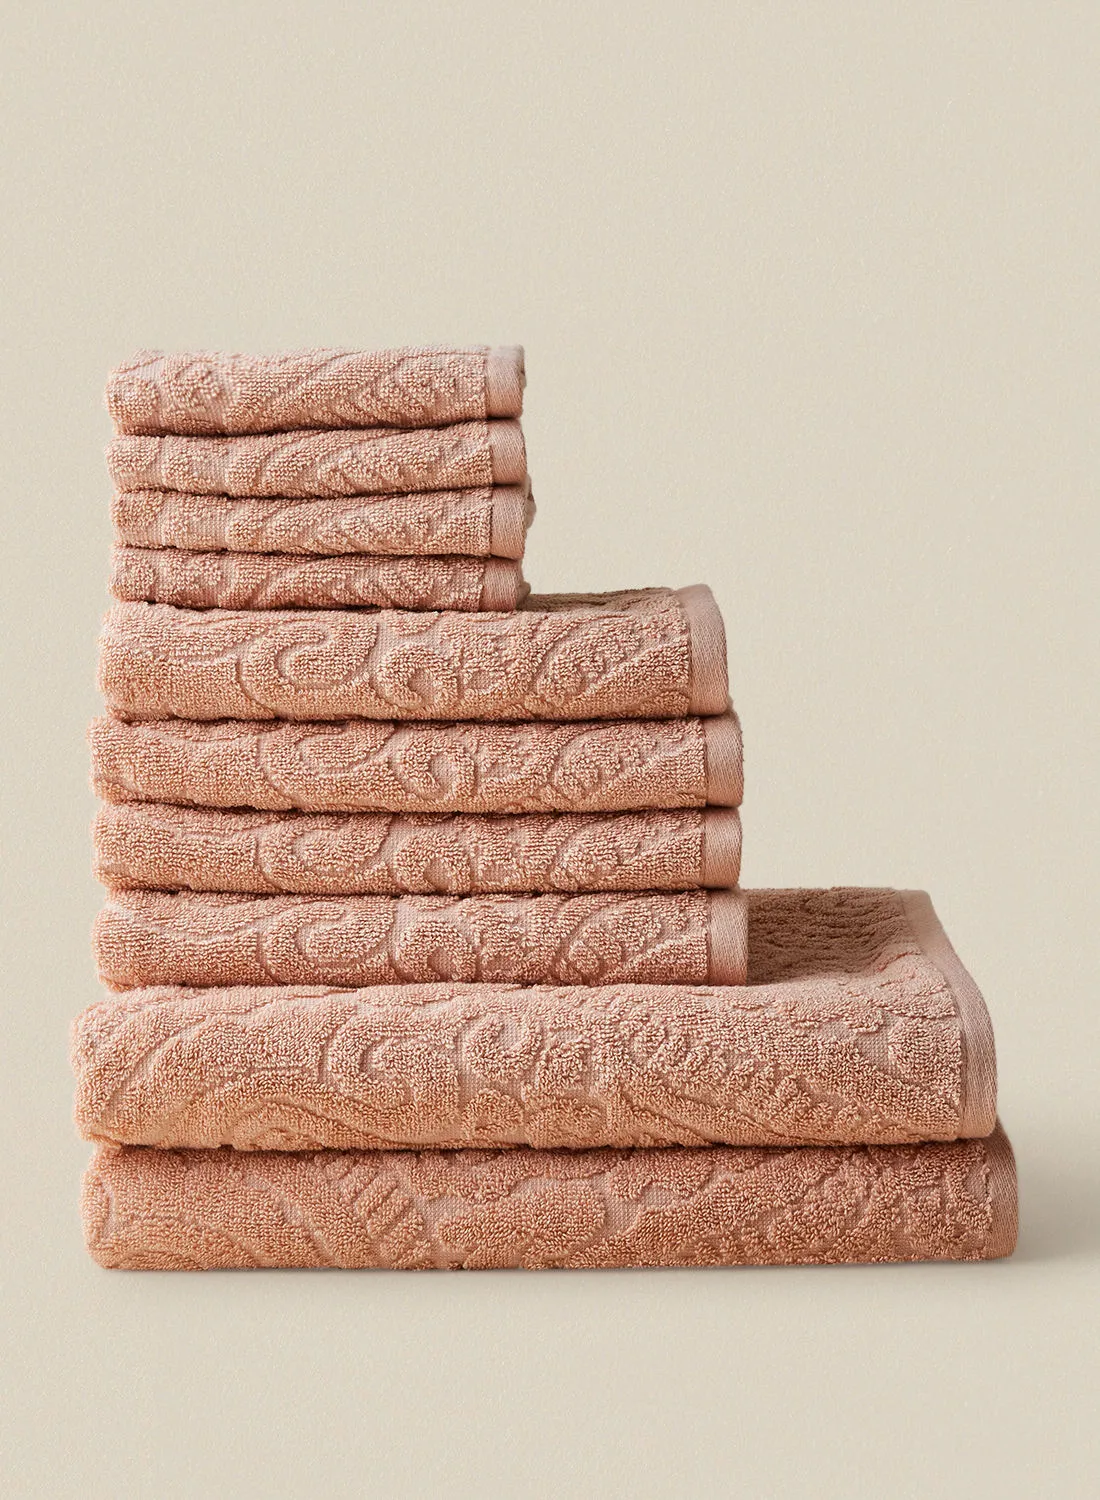 noon east 10 Piece Bathroom Towel Set - 500 GSM 100% Cotton - 4 Hand Towel - 4 Face Towel - 2 Bath Towel - Ginger Color - Highly Absorbent - Fast Dry